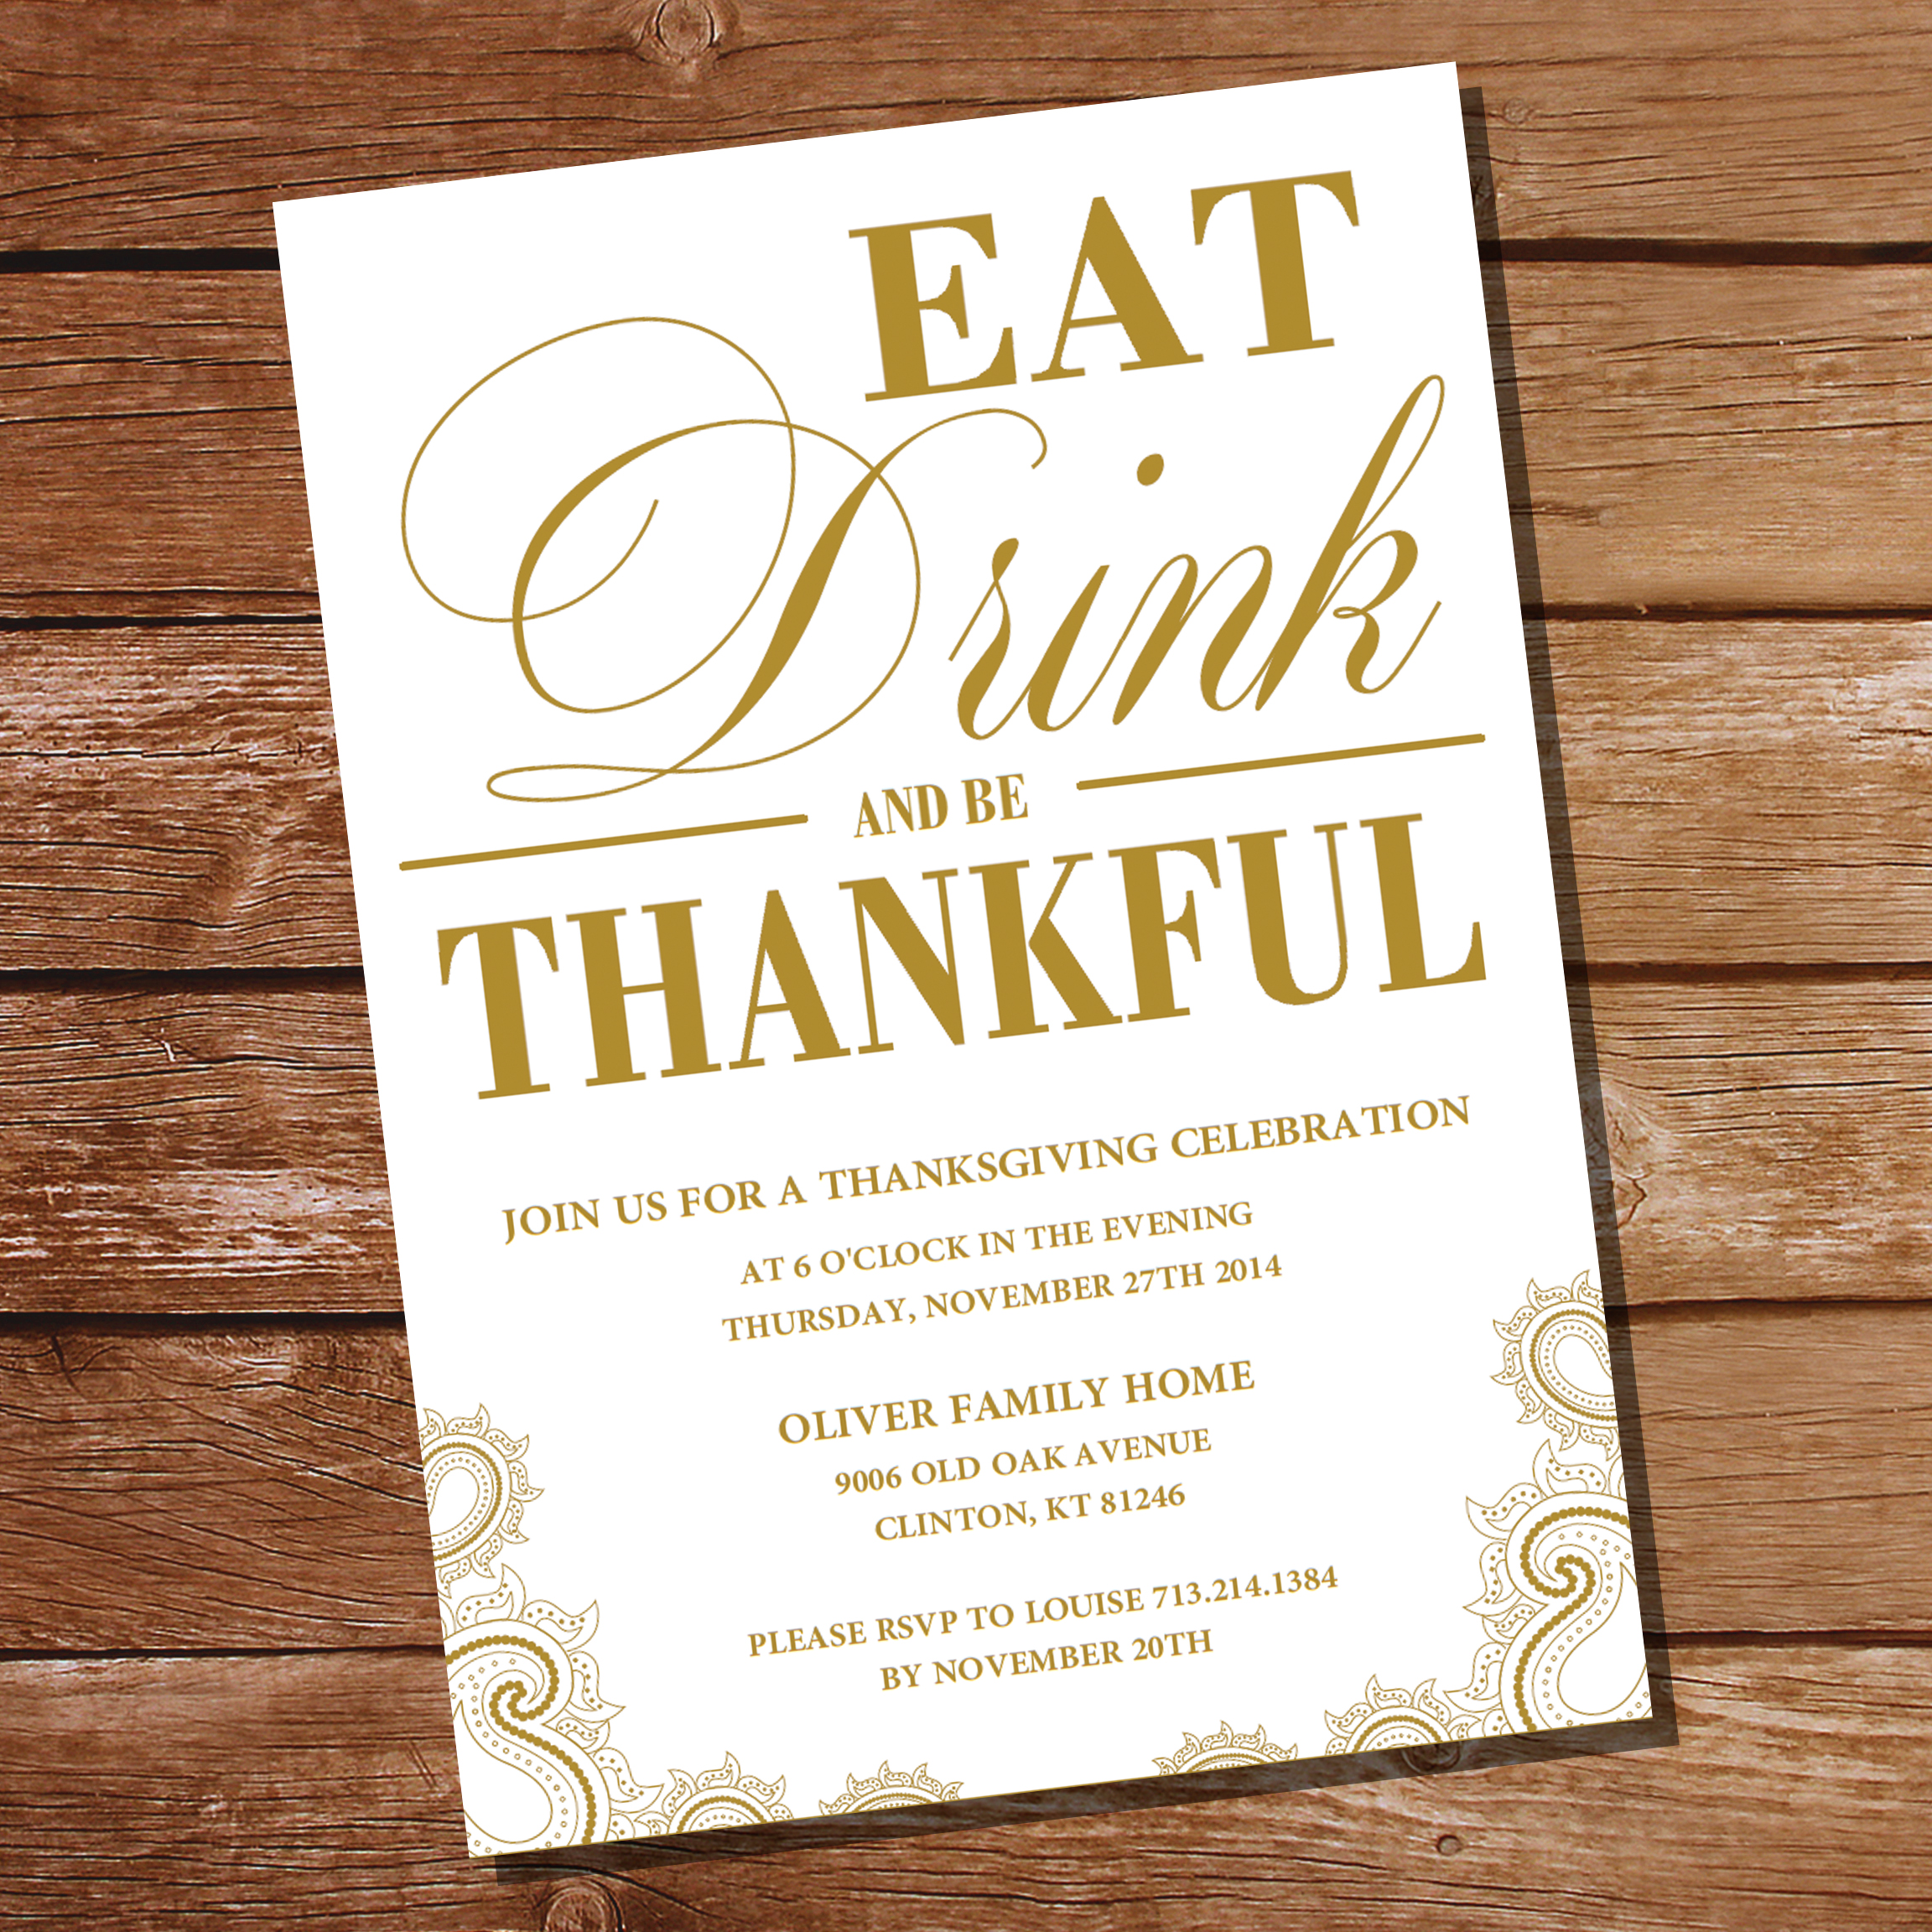 Classic White and Gold Thanksgiving invitation